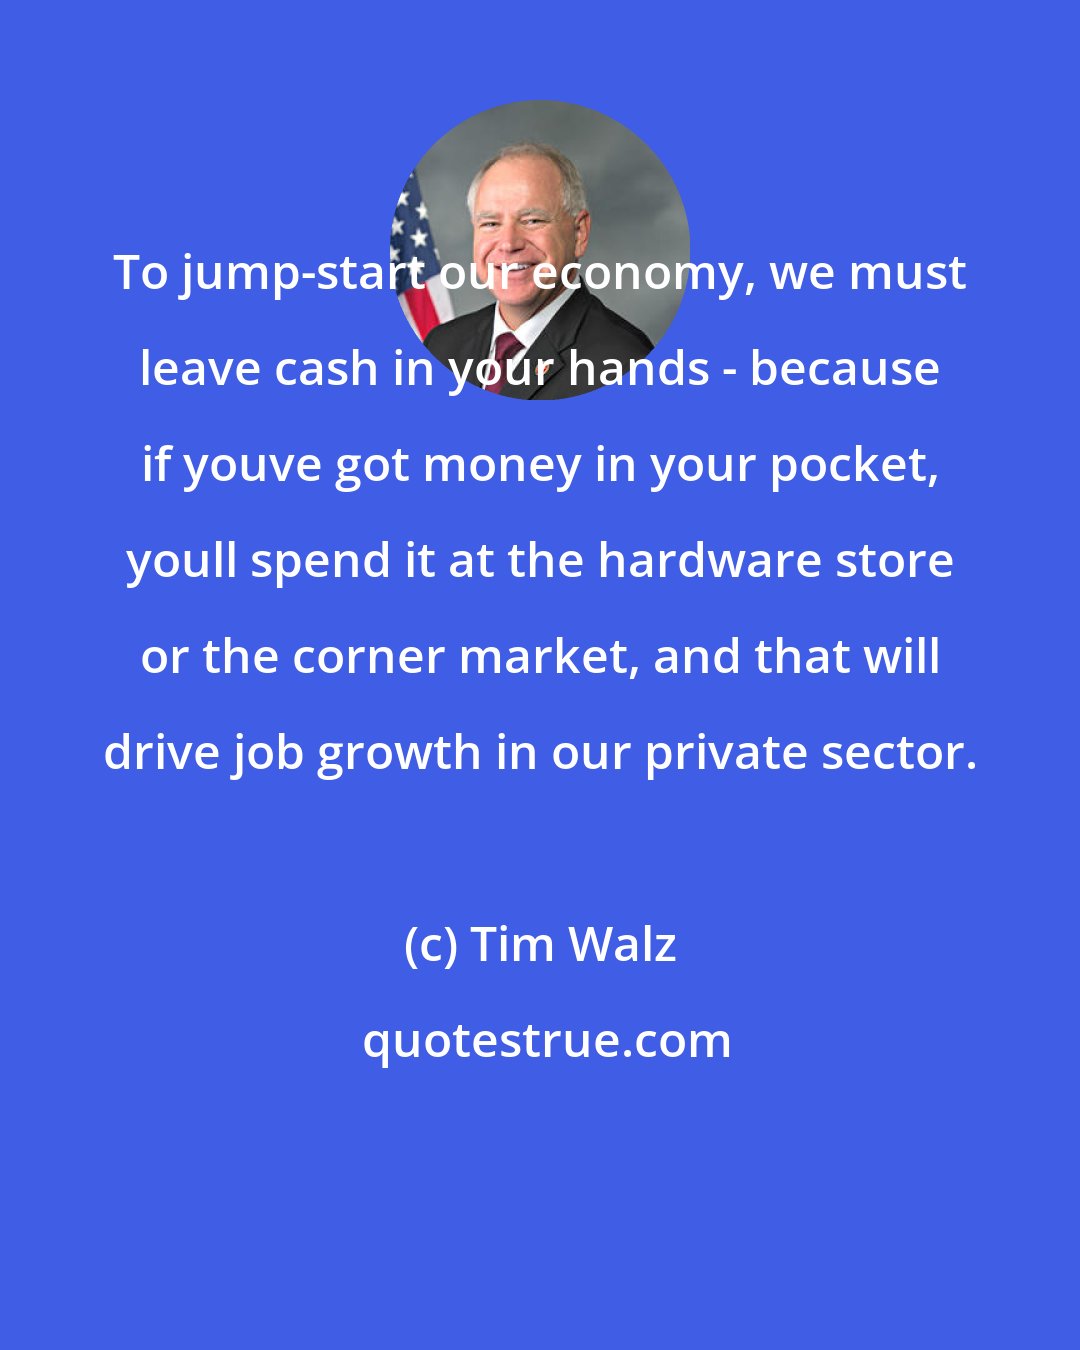 Tim Walz: To jump-start our economy, we must leave cash in your hands - because if youve got money in your pocket, youll spend it at the hardware store or the corner market, and that will drive job growth in our private sector.